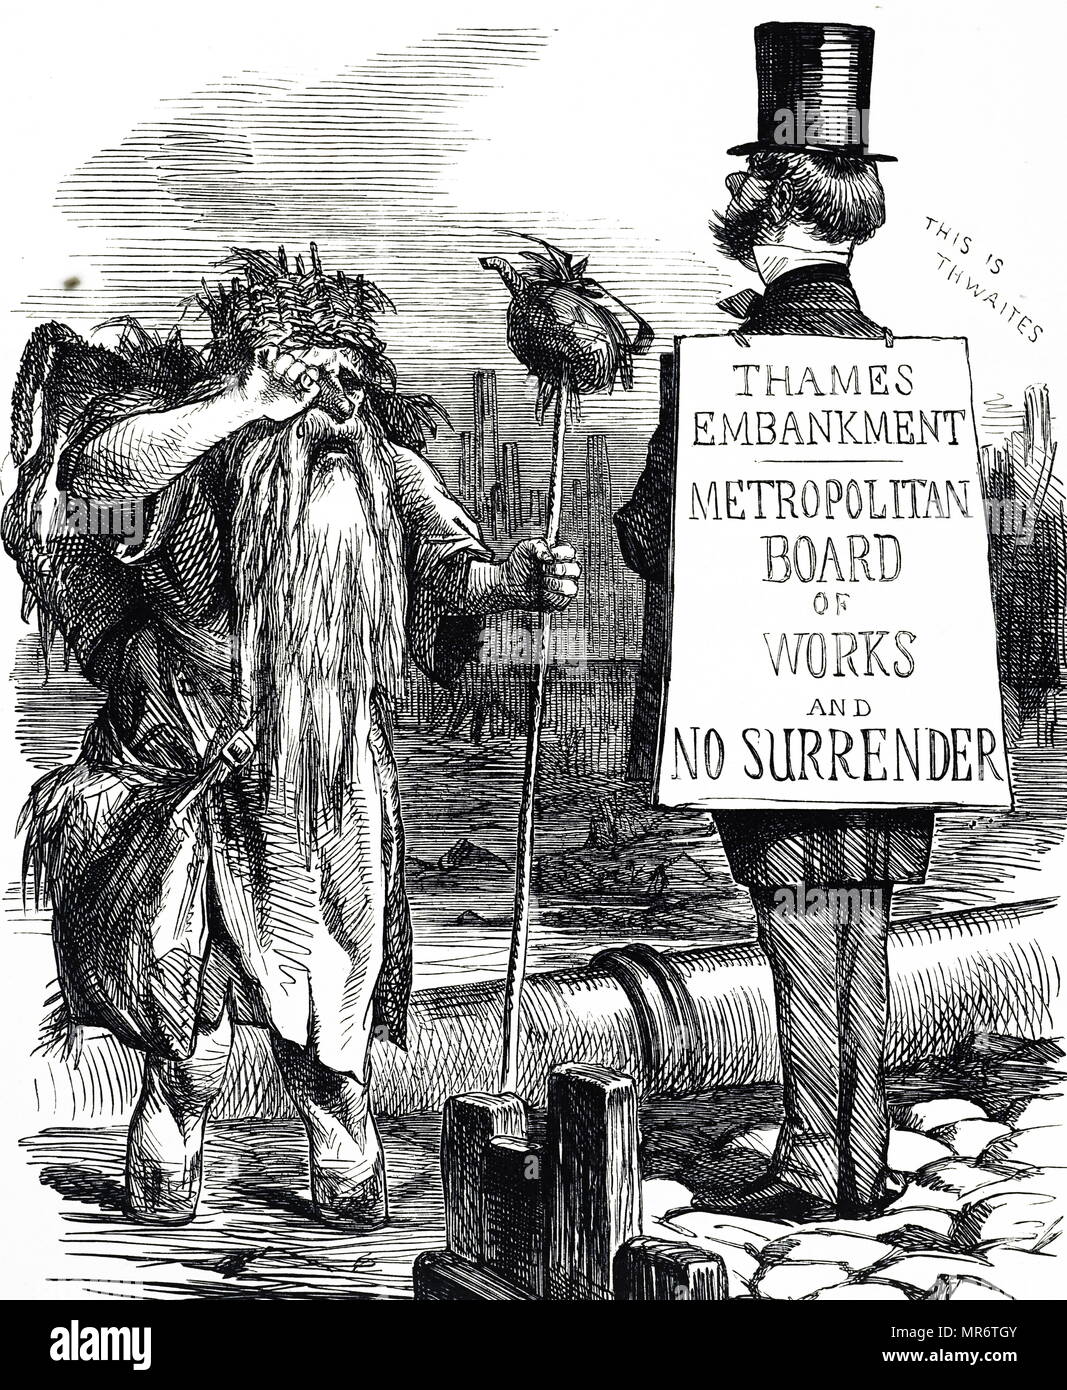 Cartoon depicting John Thwaites, Chairman of the Metropolitan Board of Works, face to face with Father Thames. In 1861 the Board received nearly a million pounds and spent £900,000 on the Thames Embankment and the Metropolitan Main Drainage Scheme amid at clearing up the Thames and providing London with proper sewage disposal. John Thwaites (1815-1870) a British politician and first Chairman of the Metropolitan Board of Works. Dated 19th century Stock Photo